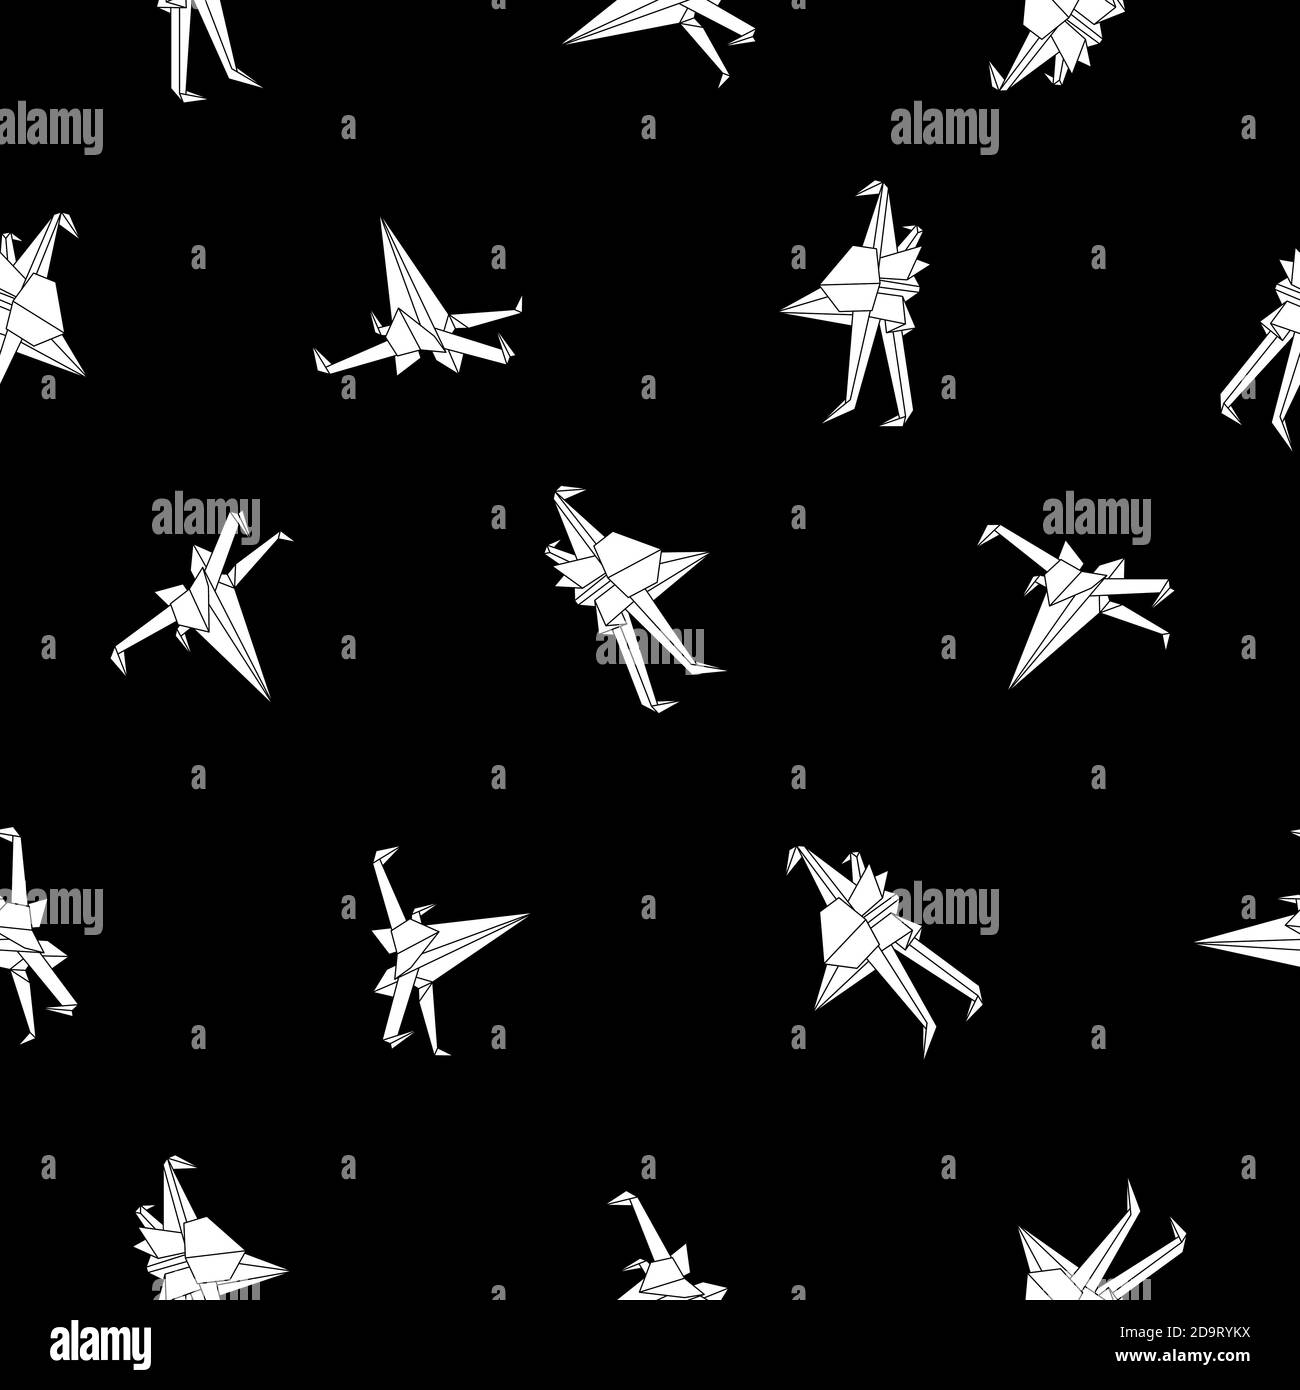 Seamless pattern of space fighters on black background. Paper origami spaceship ornament. Polygonal decor for fabrics, wallpaper and etc. Vector black and white cosmic illustration Stock Vector